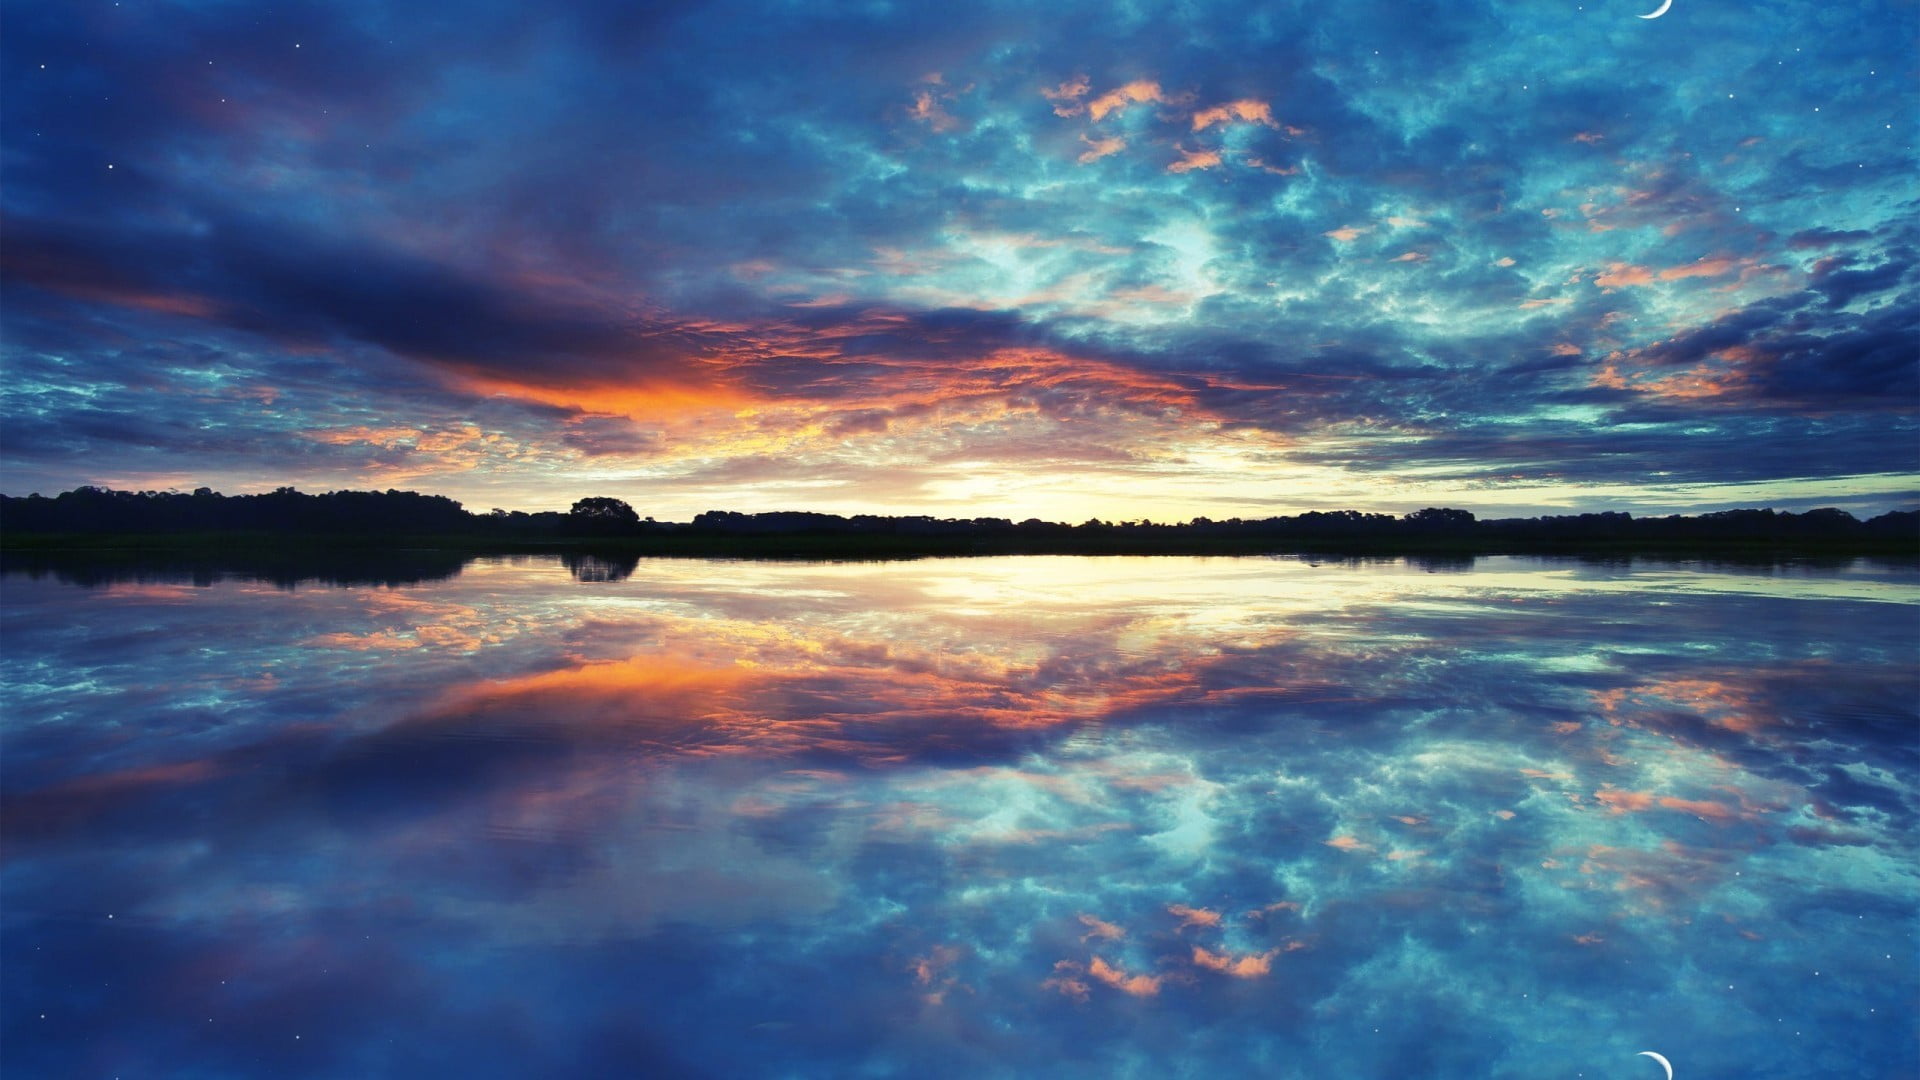 landscape photography of body of water, landscape, lake, clouds, reflection